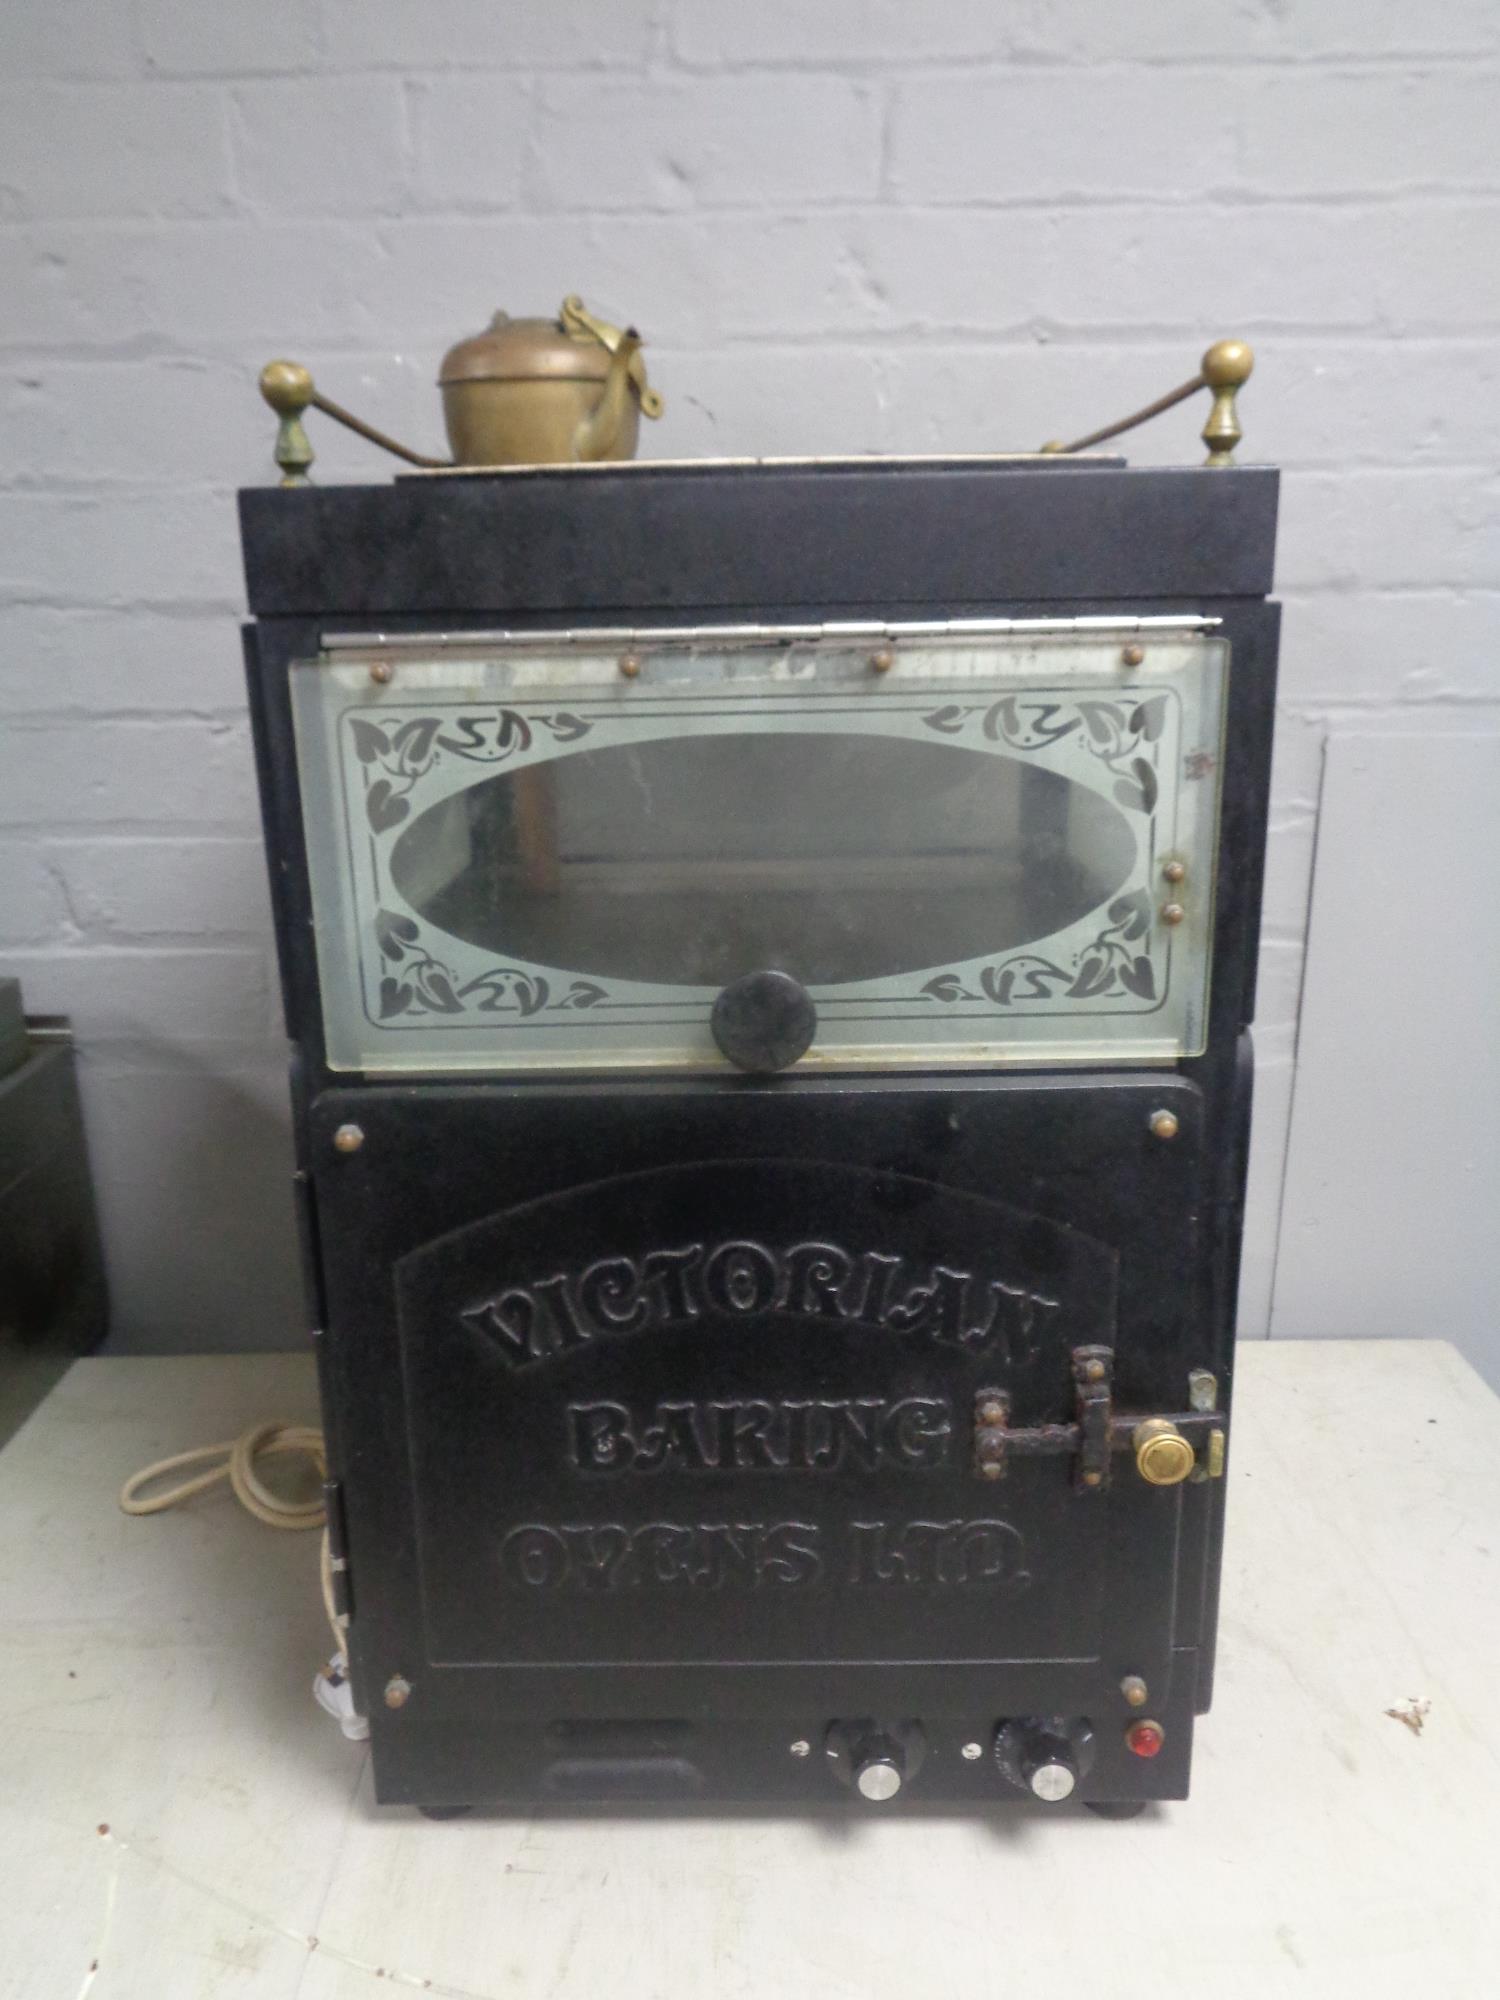 A Victorian style baking oven.